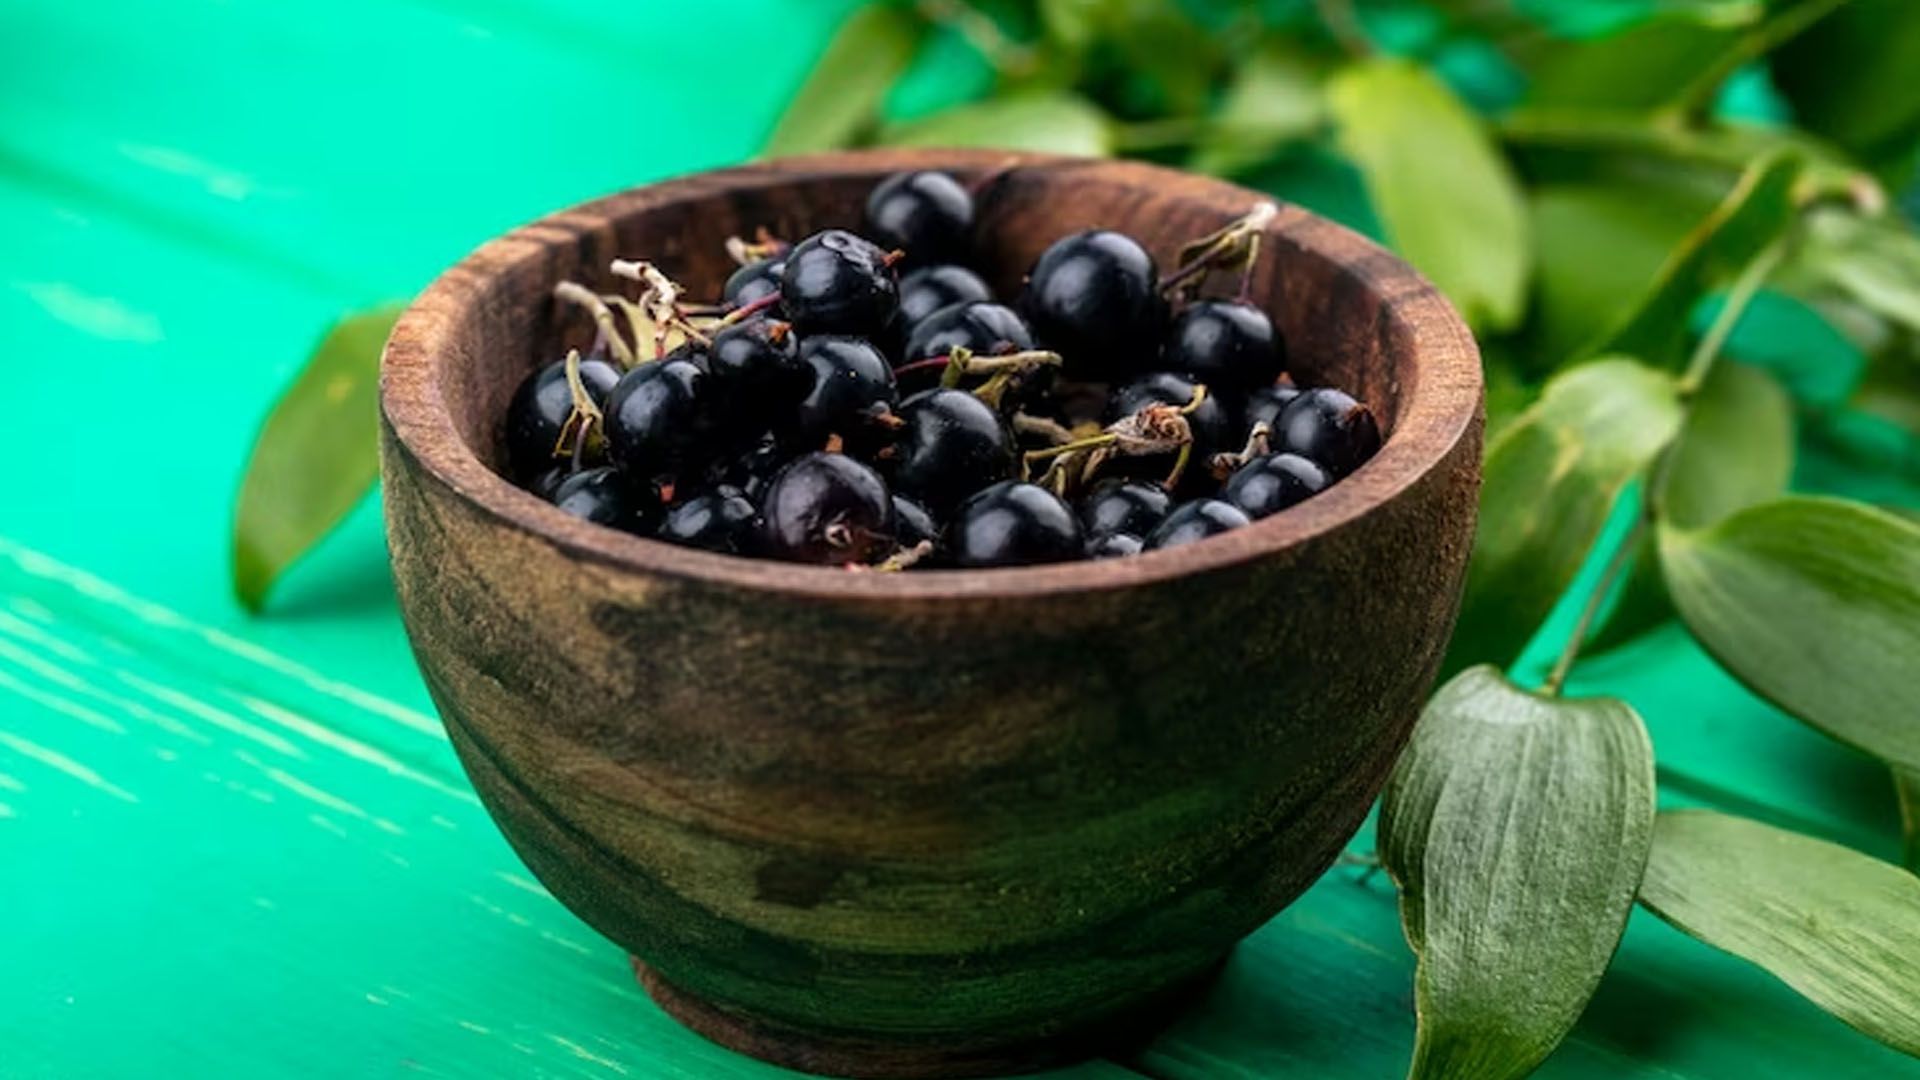 What Are The Health Benefits of Maqui Berries?